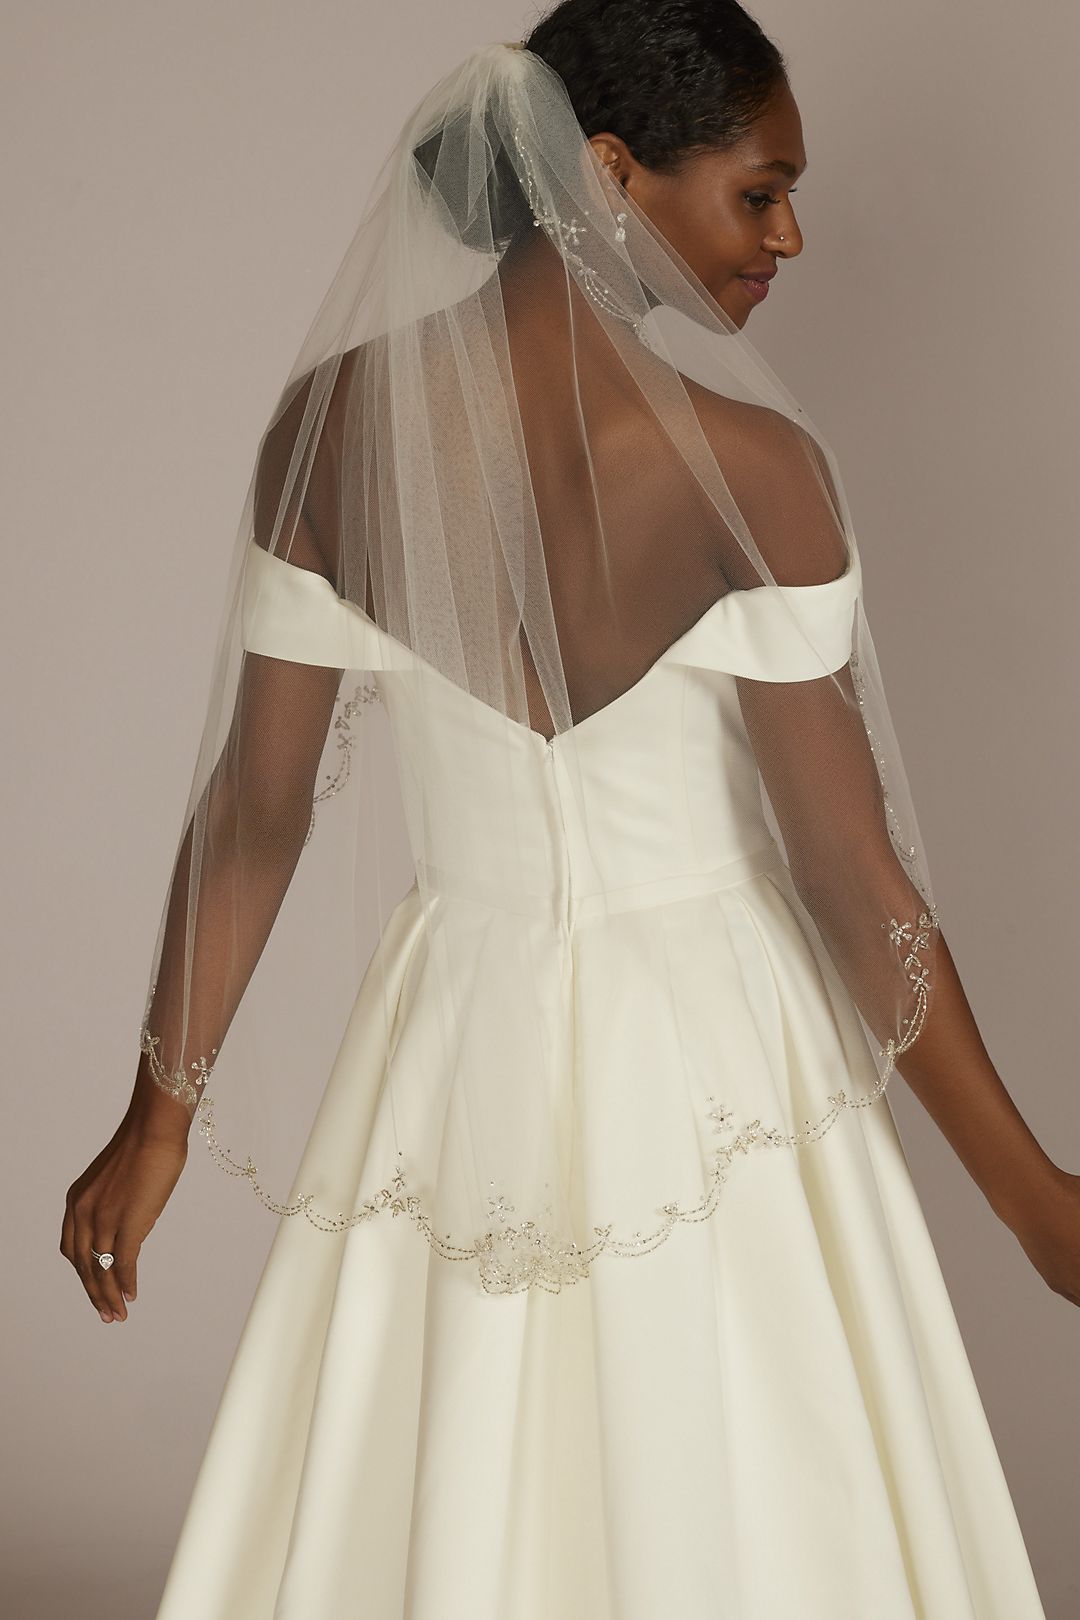 Fingertip Veil Edged with Lace Appliqués with Beads and Sequins